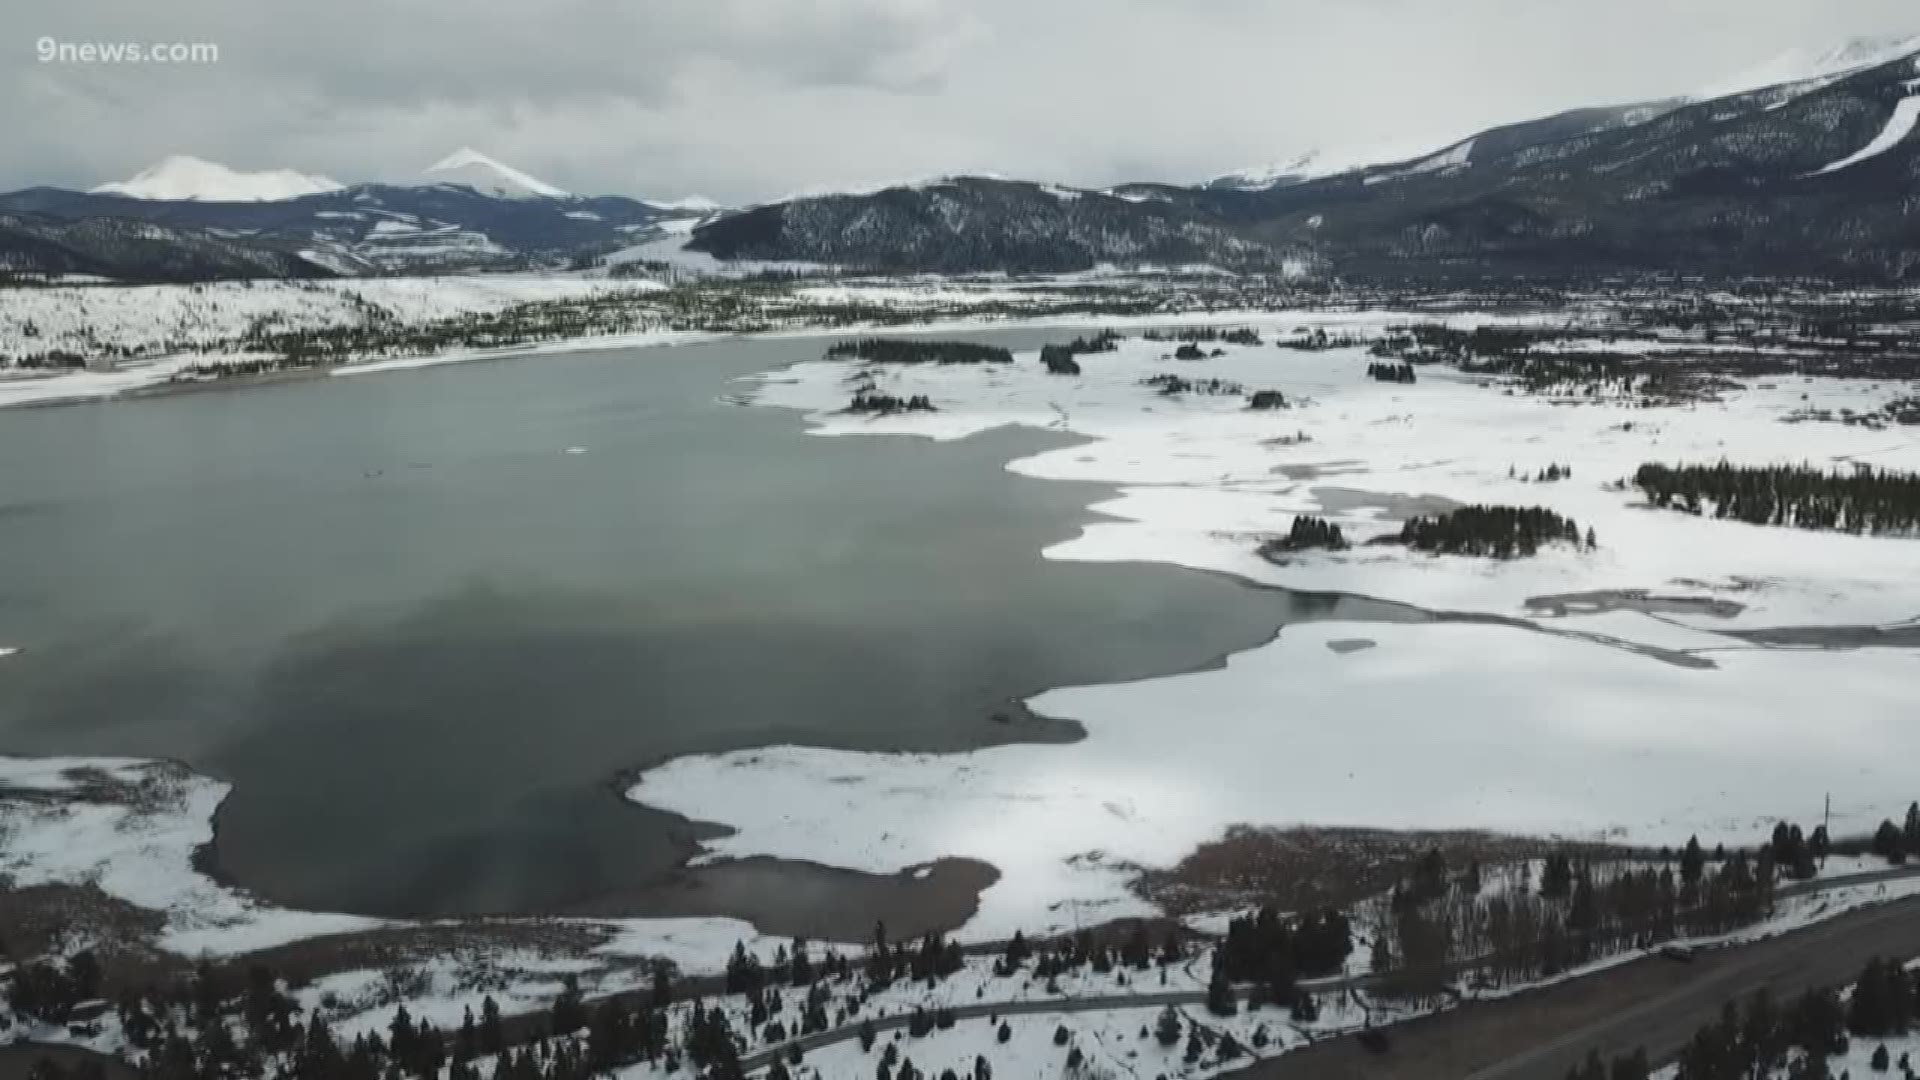 Denver Water wants to make sure the reservoir has enough room to hold all the water once runoff starts.